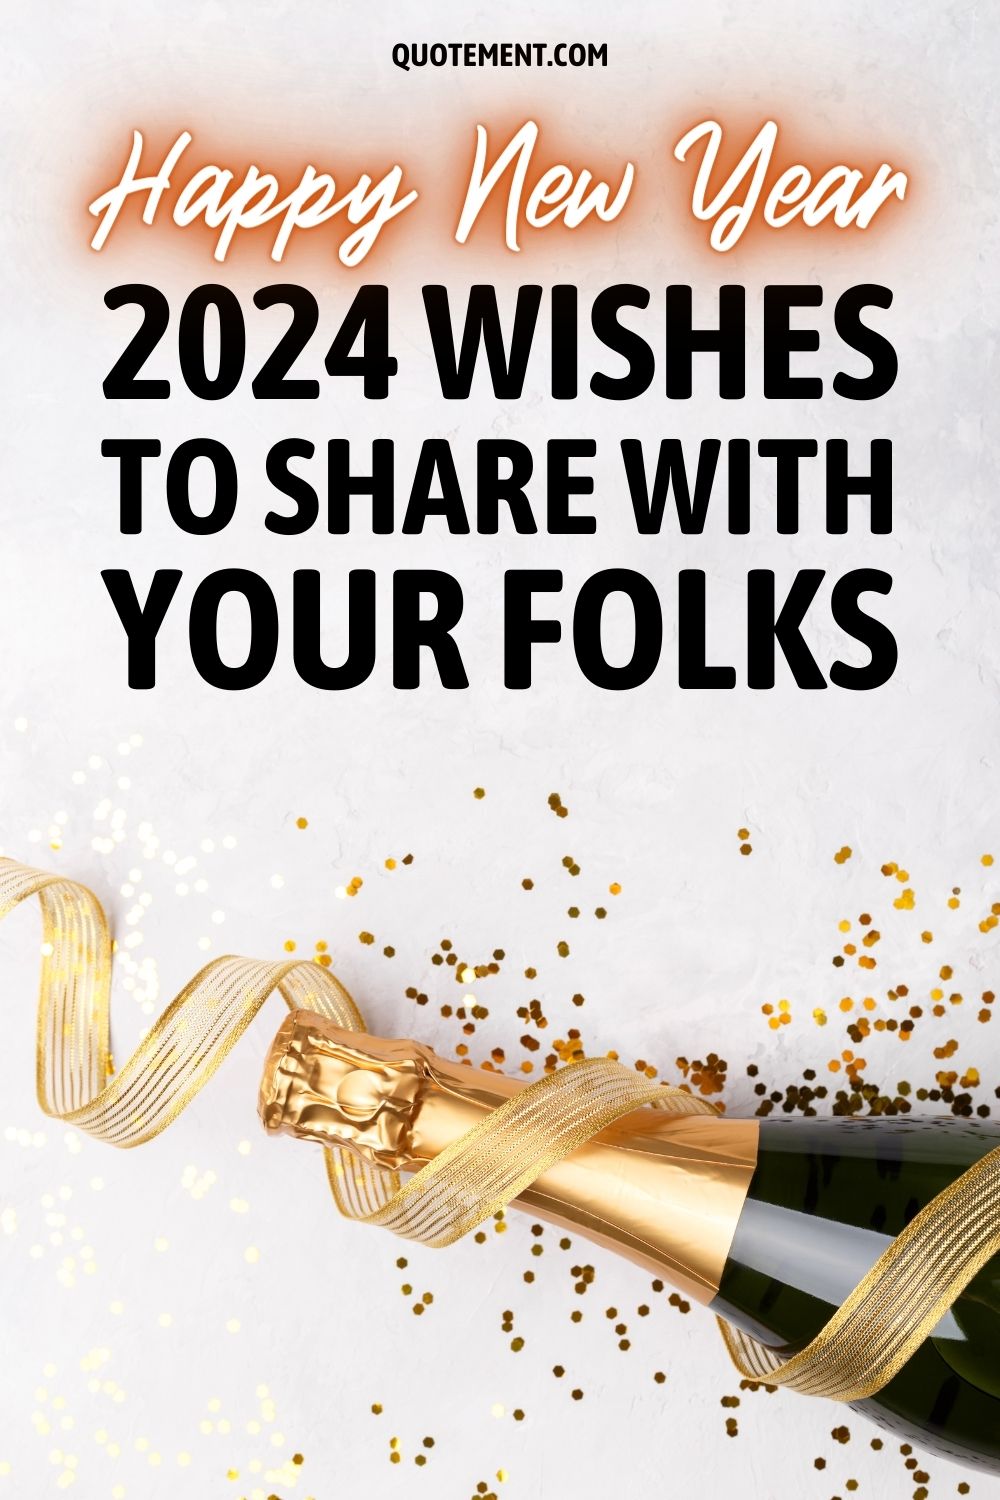 90 Happy New Year 2024 Wishes To Share With Your Folks
